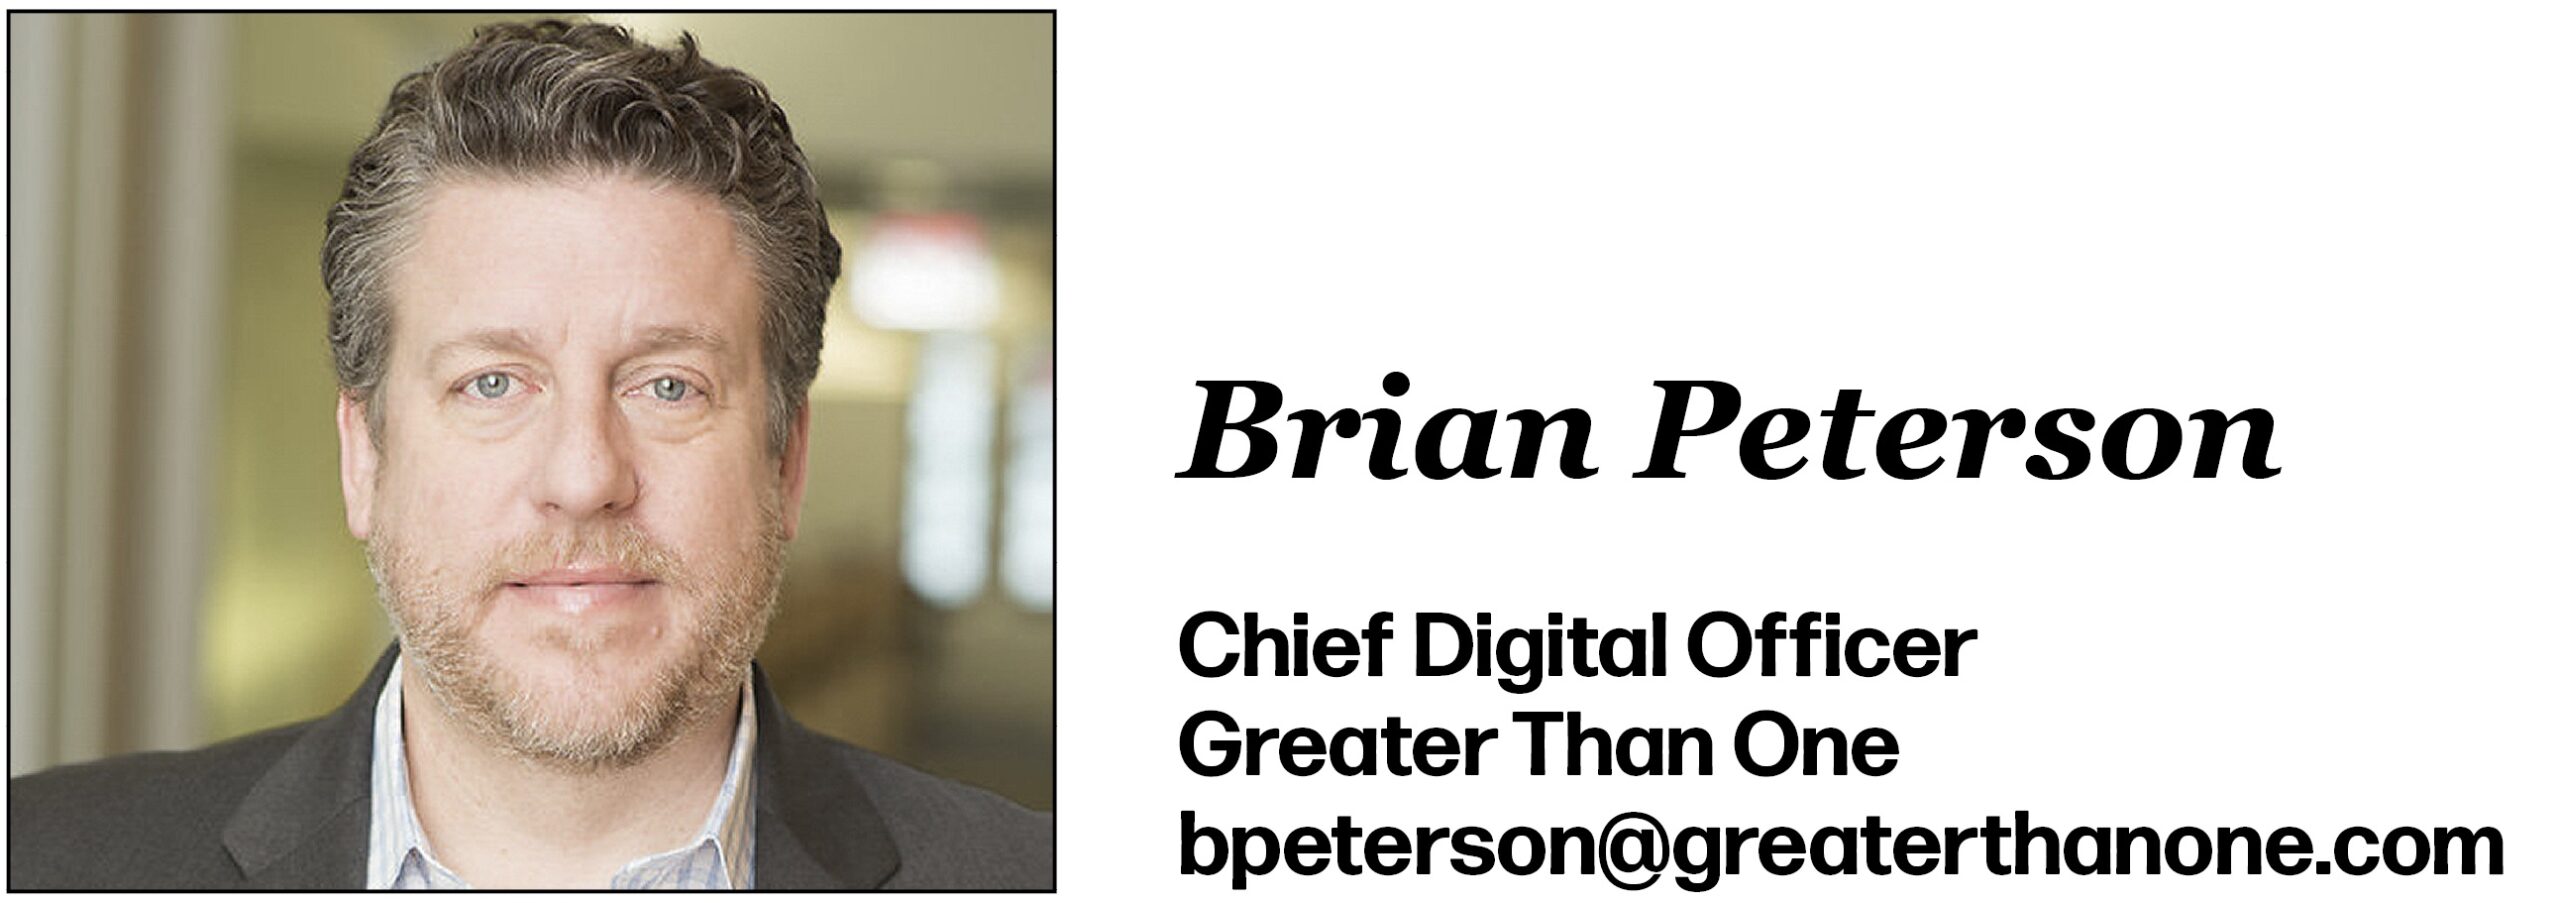 Brian Peterson Chief Digital Officer Greater Than One bpeterson@greaterthanone.com 